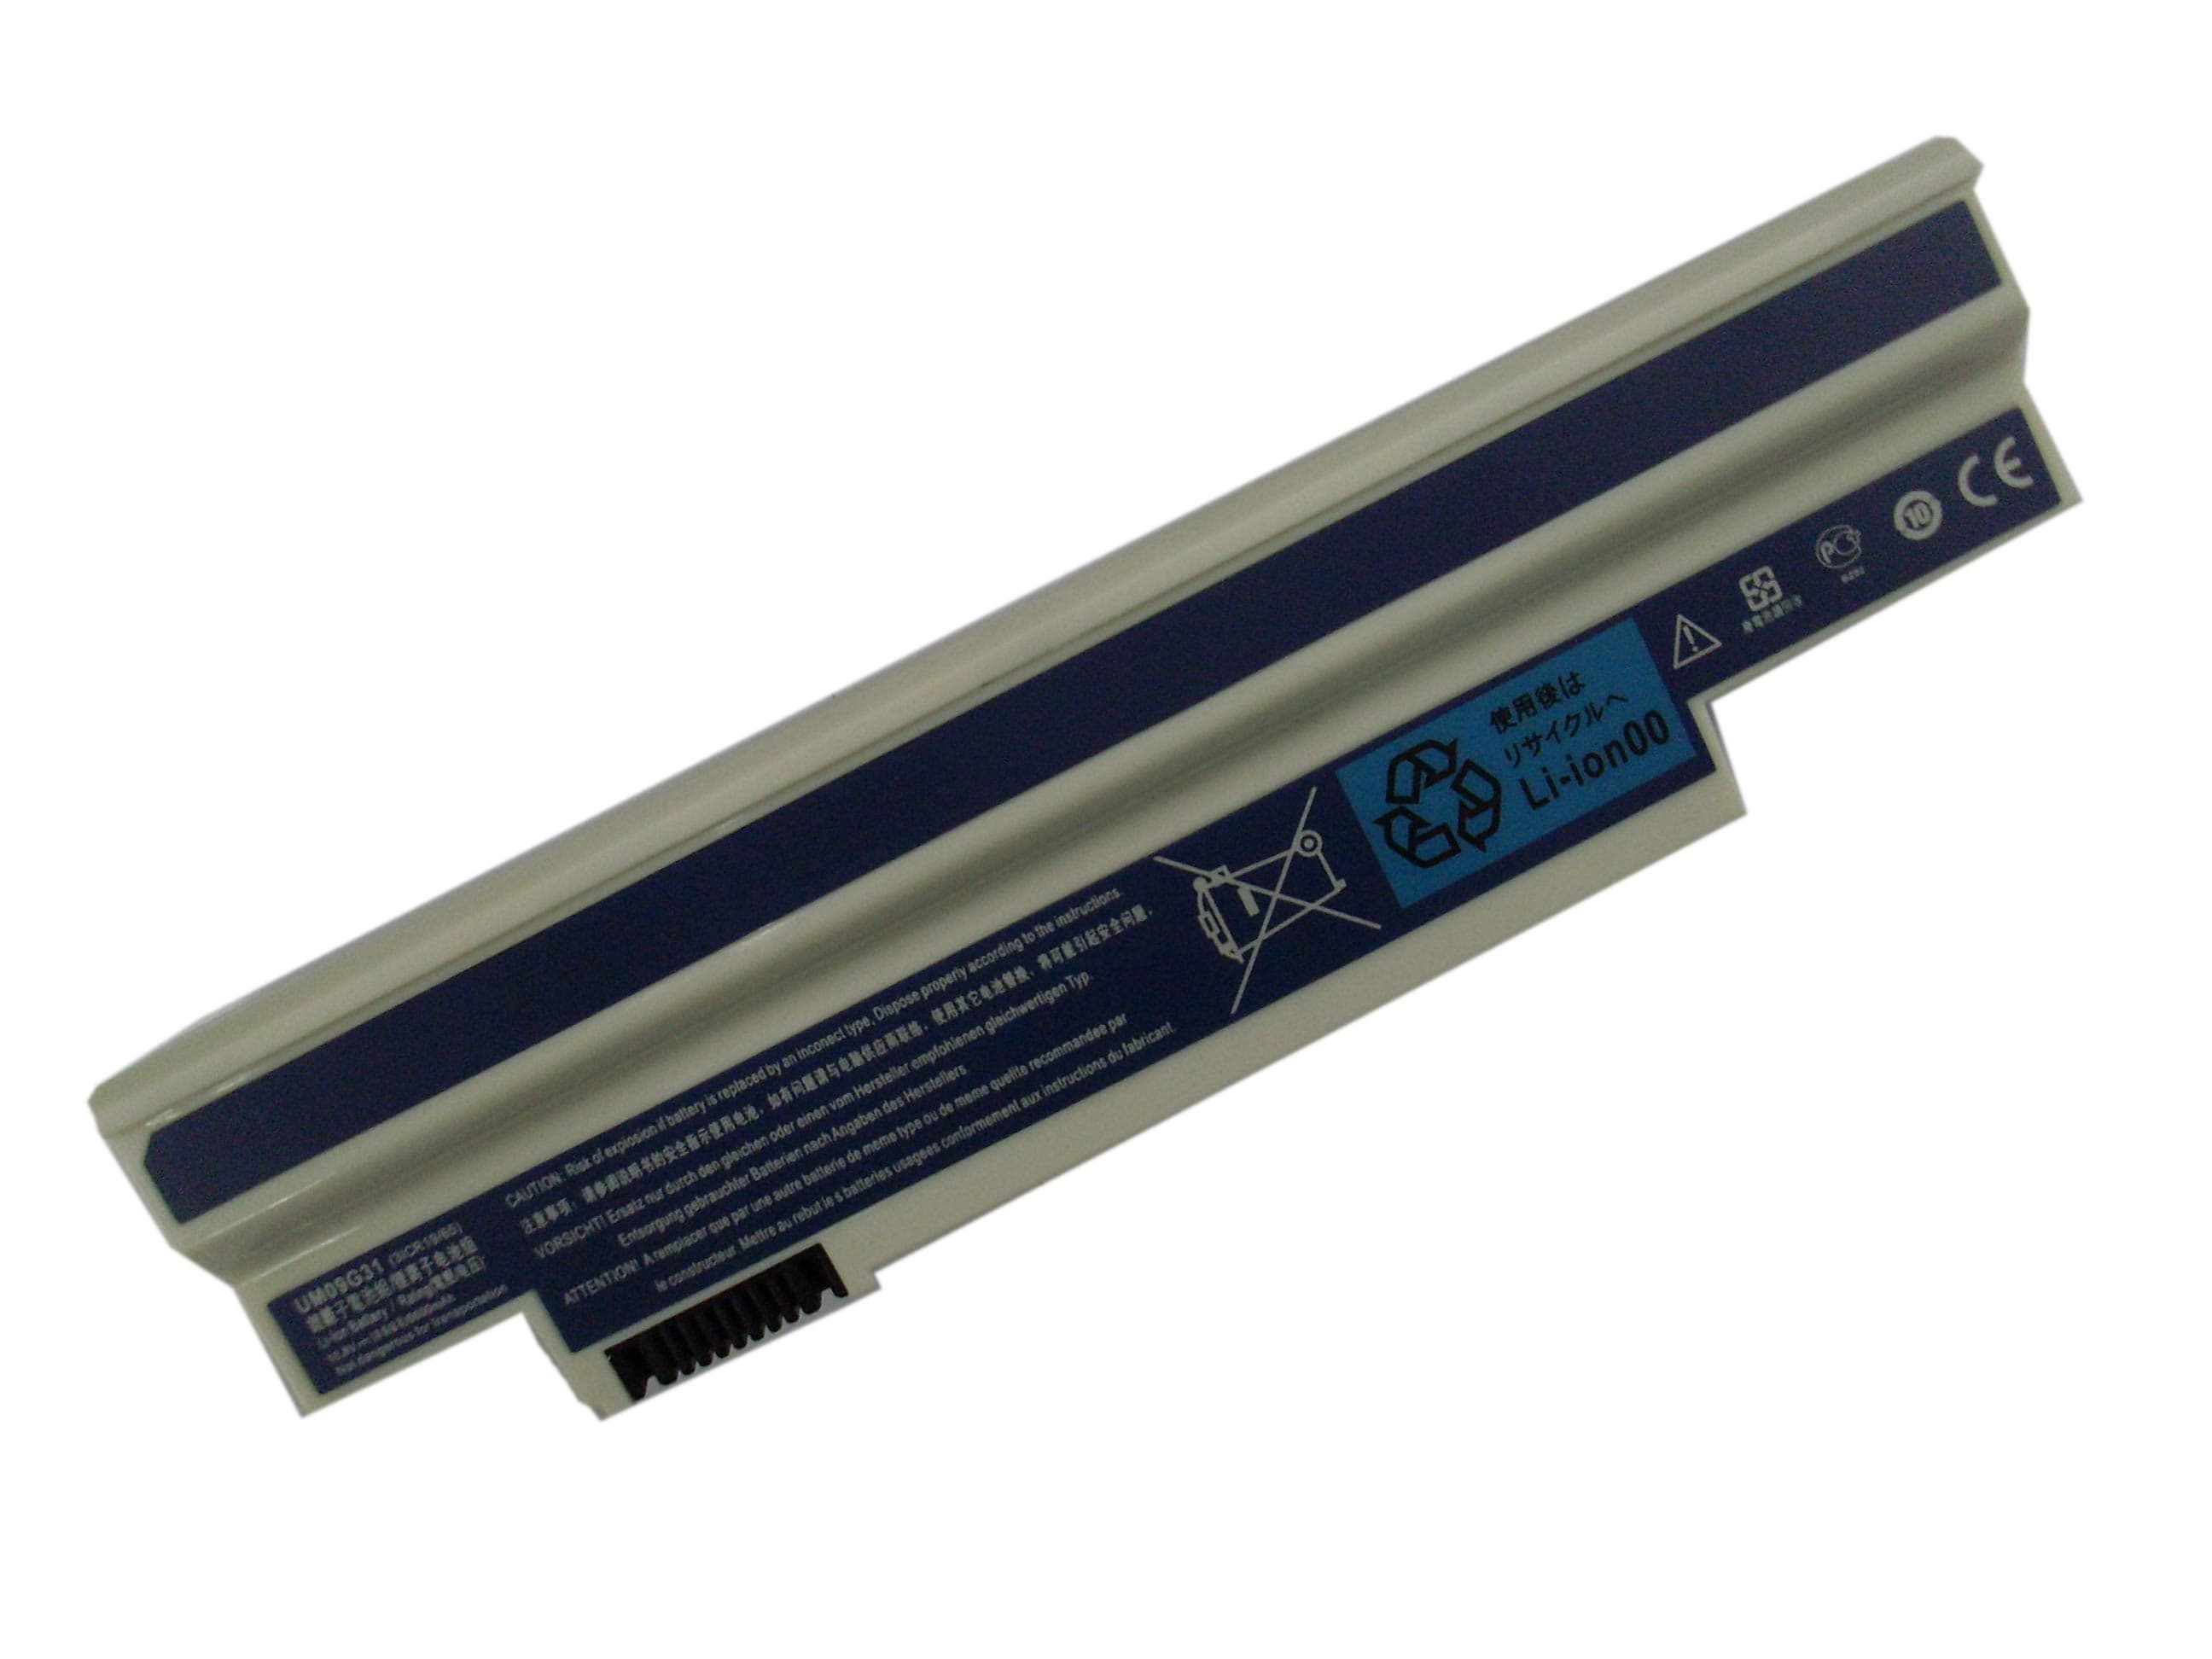 Replacement Laptop Battery for Acer Aspire One 532h Series (UM09G31)